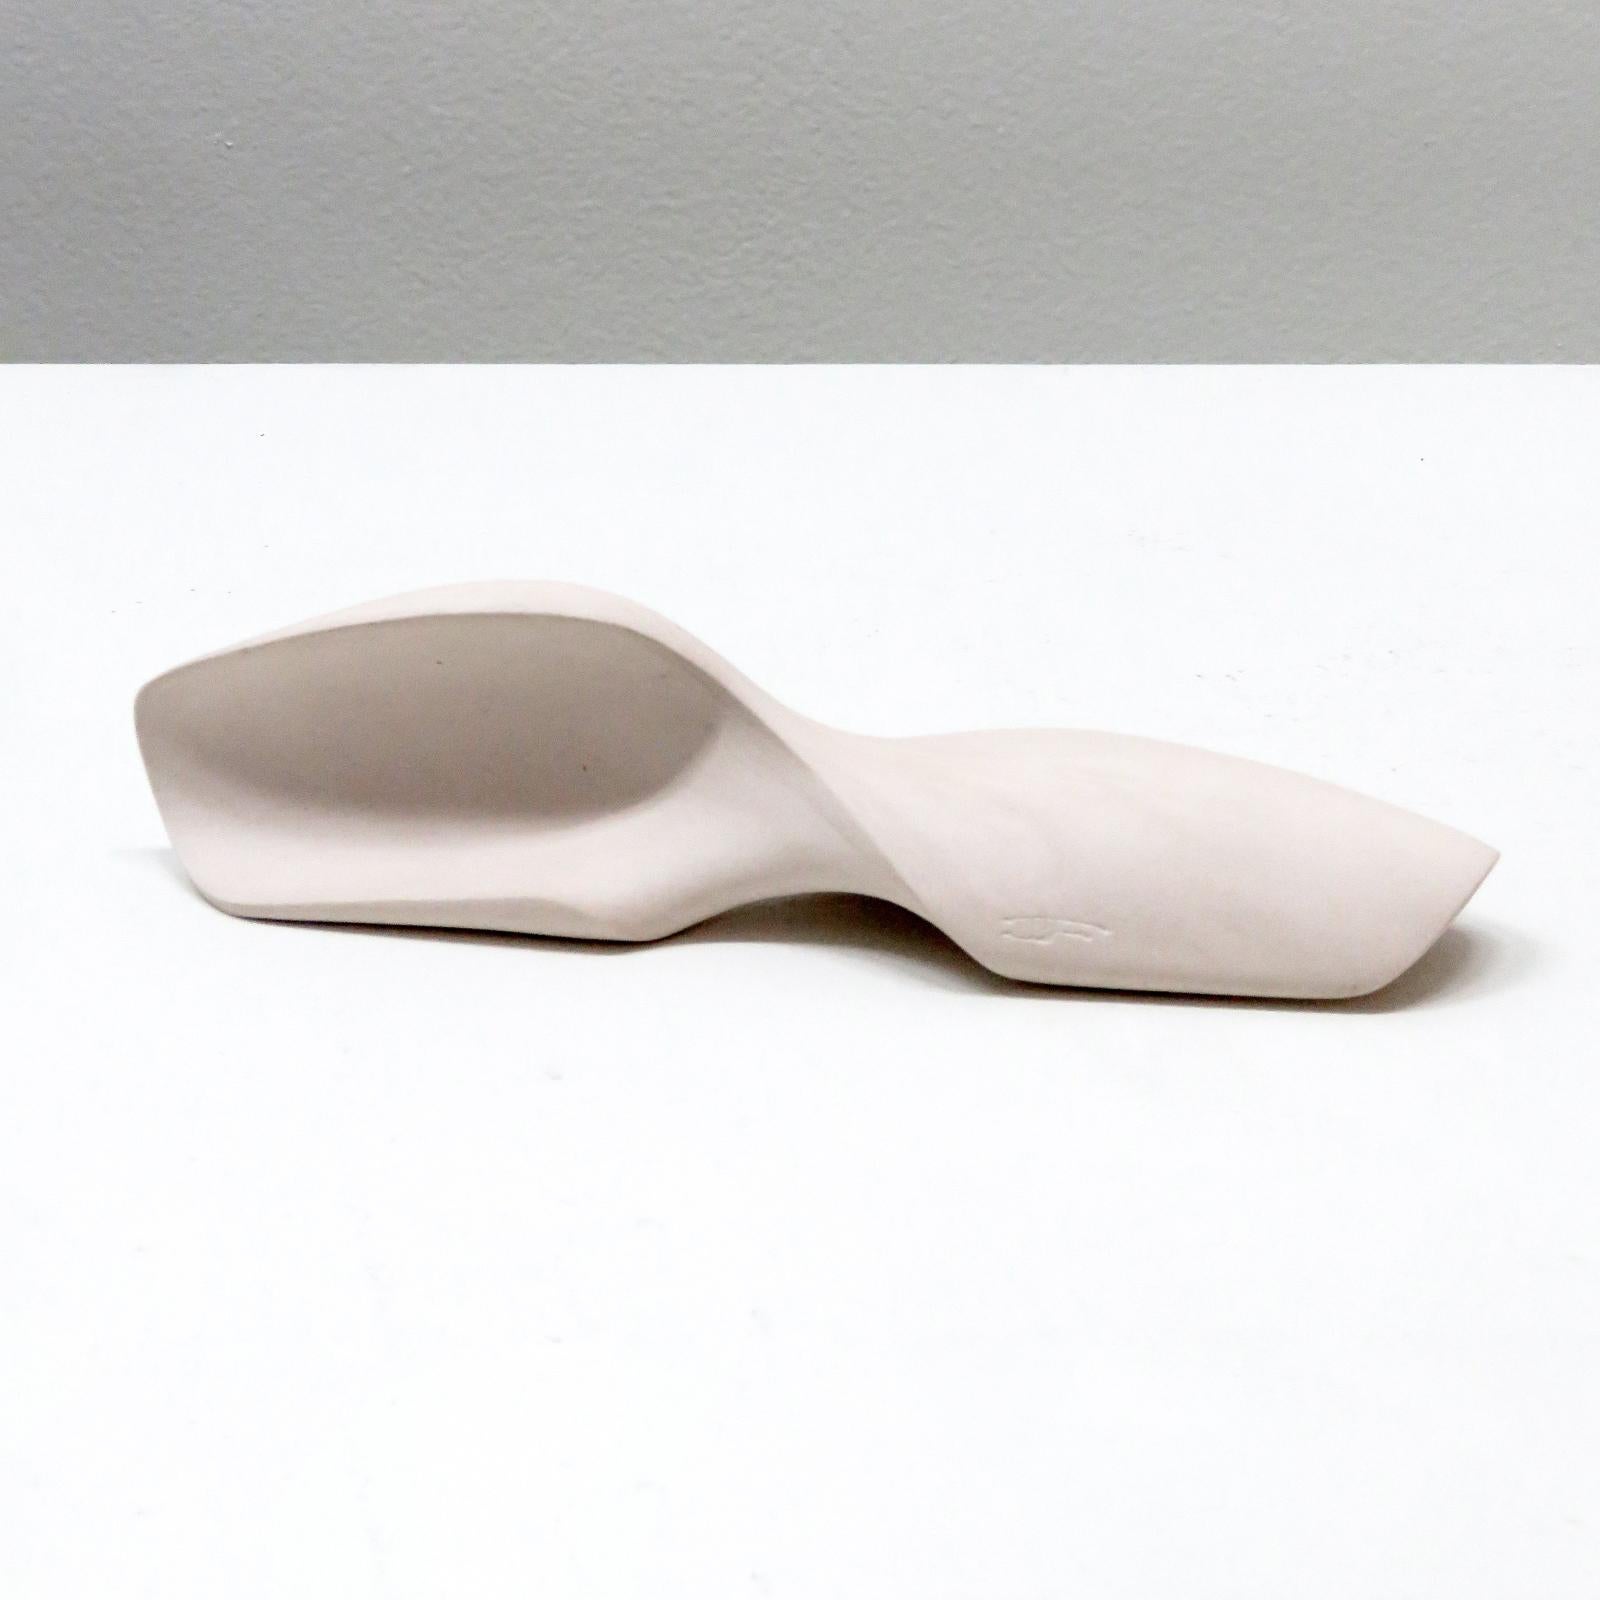 Unglazed Sculptural Palmstone 'Propeller' by Jed Farlow  For Sale